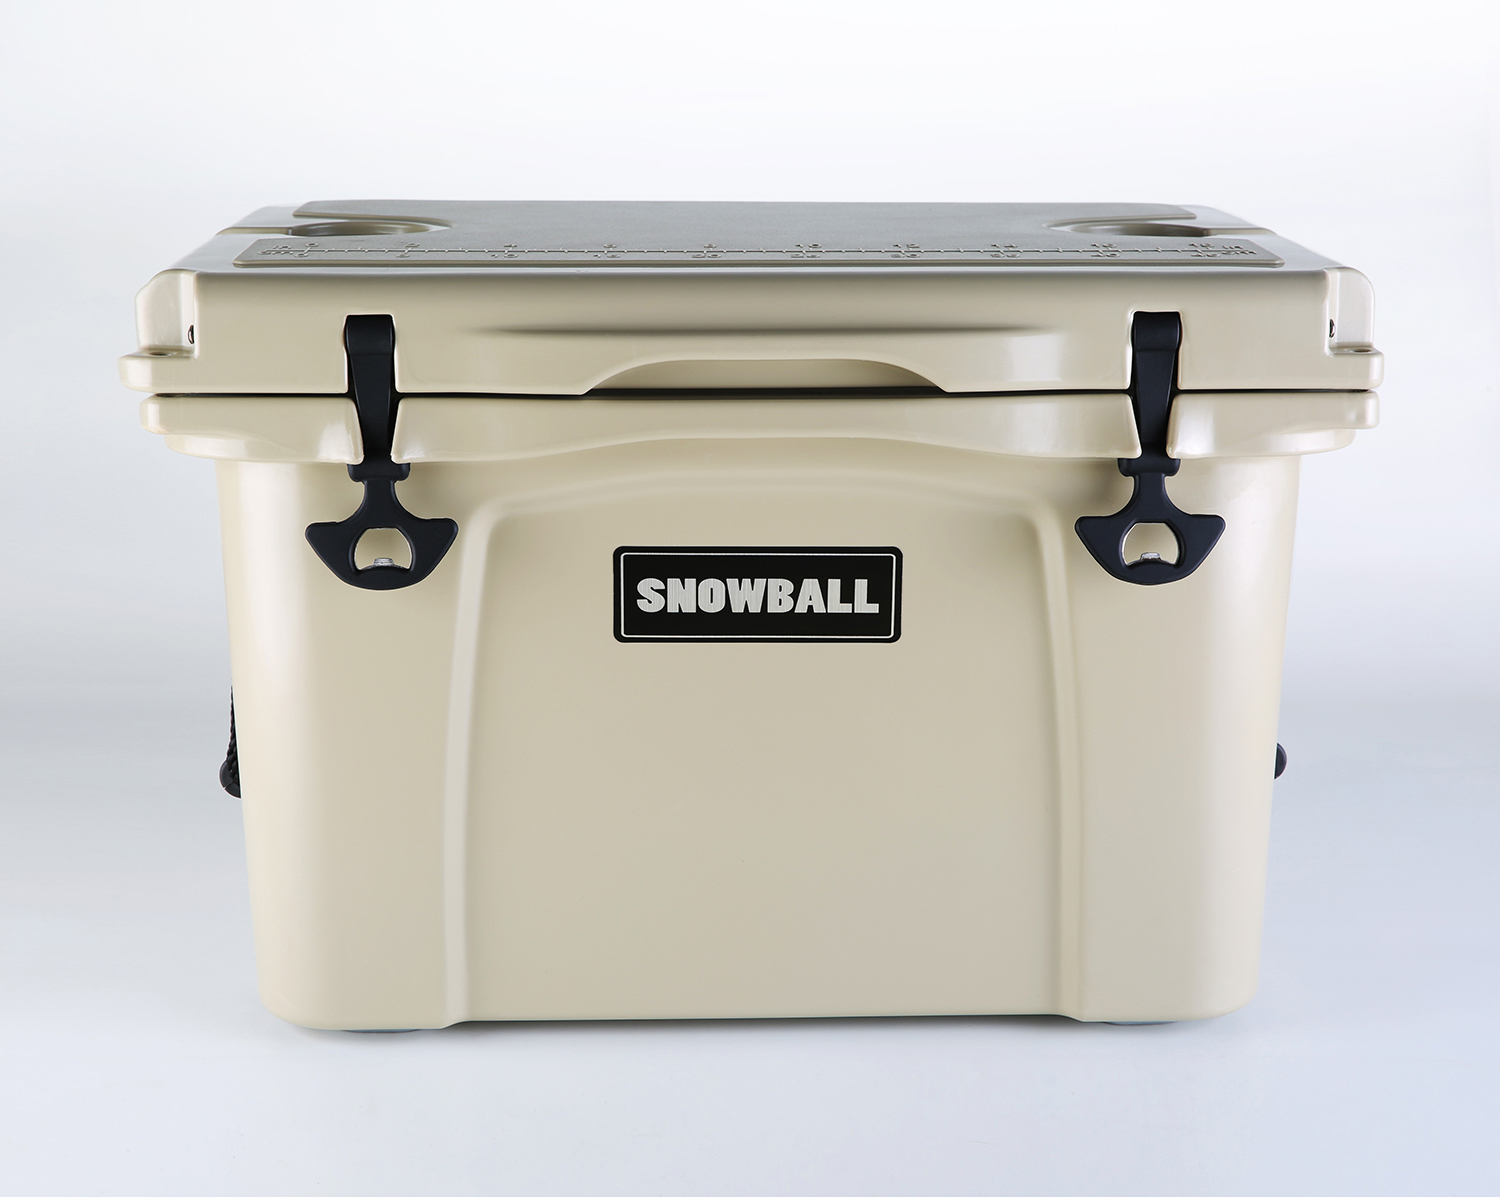 Snowball Coolers for Camping, Fishing, Hunting, BBQs & Outdoor Activities, Tan, 37QT(35L)